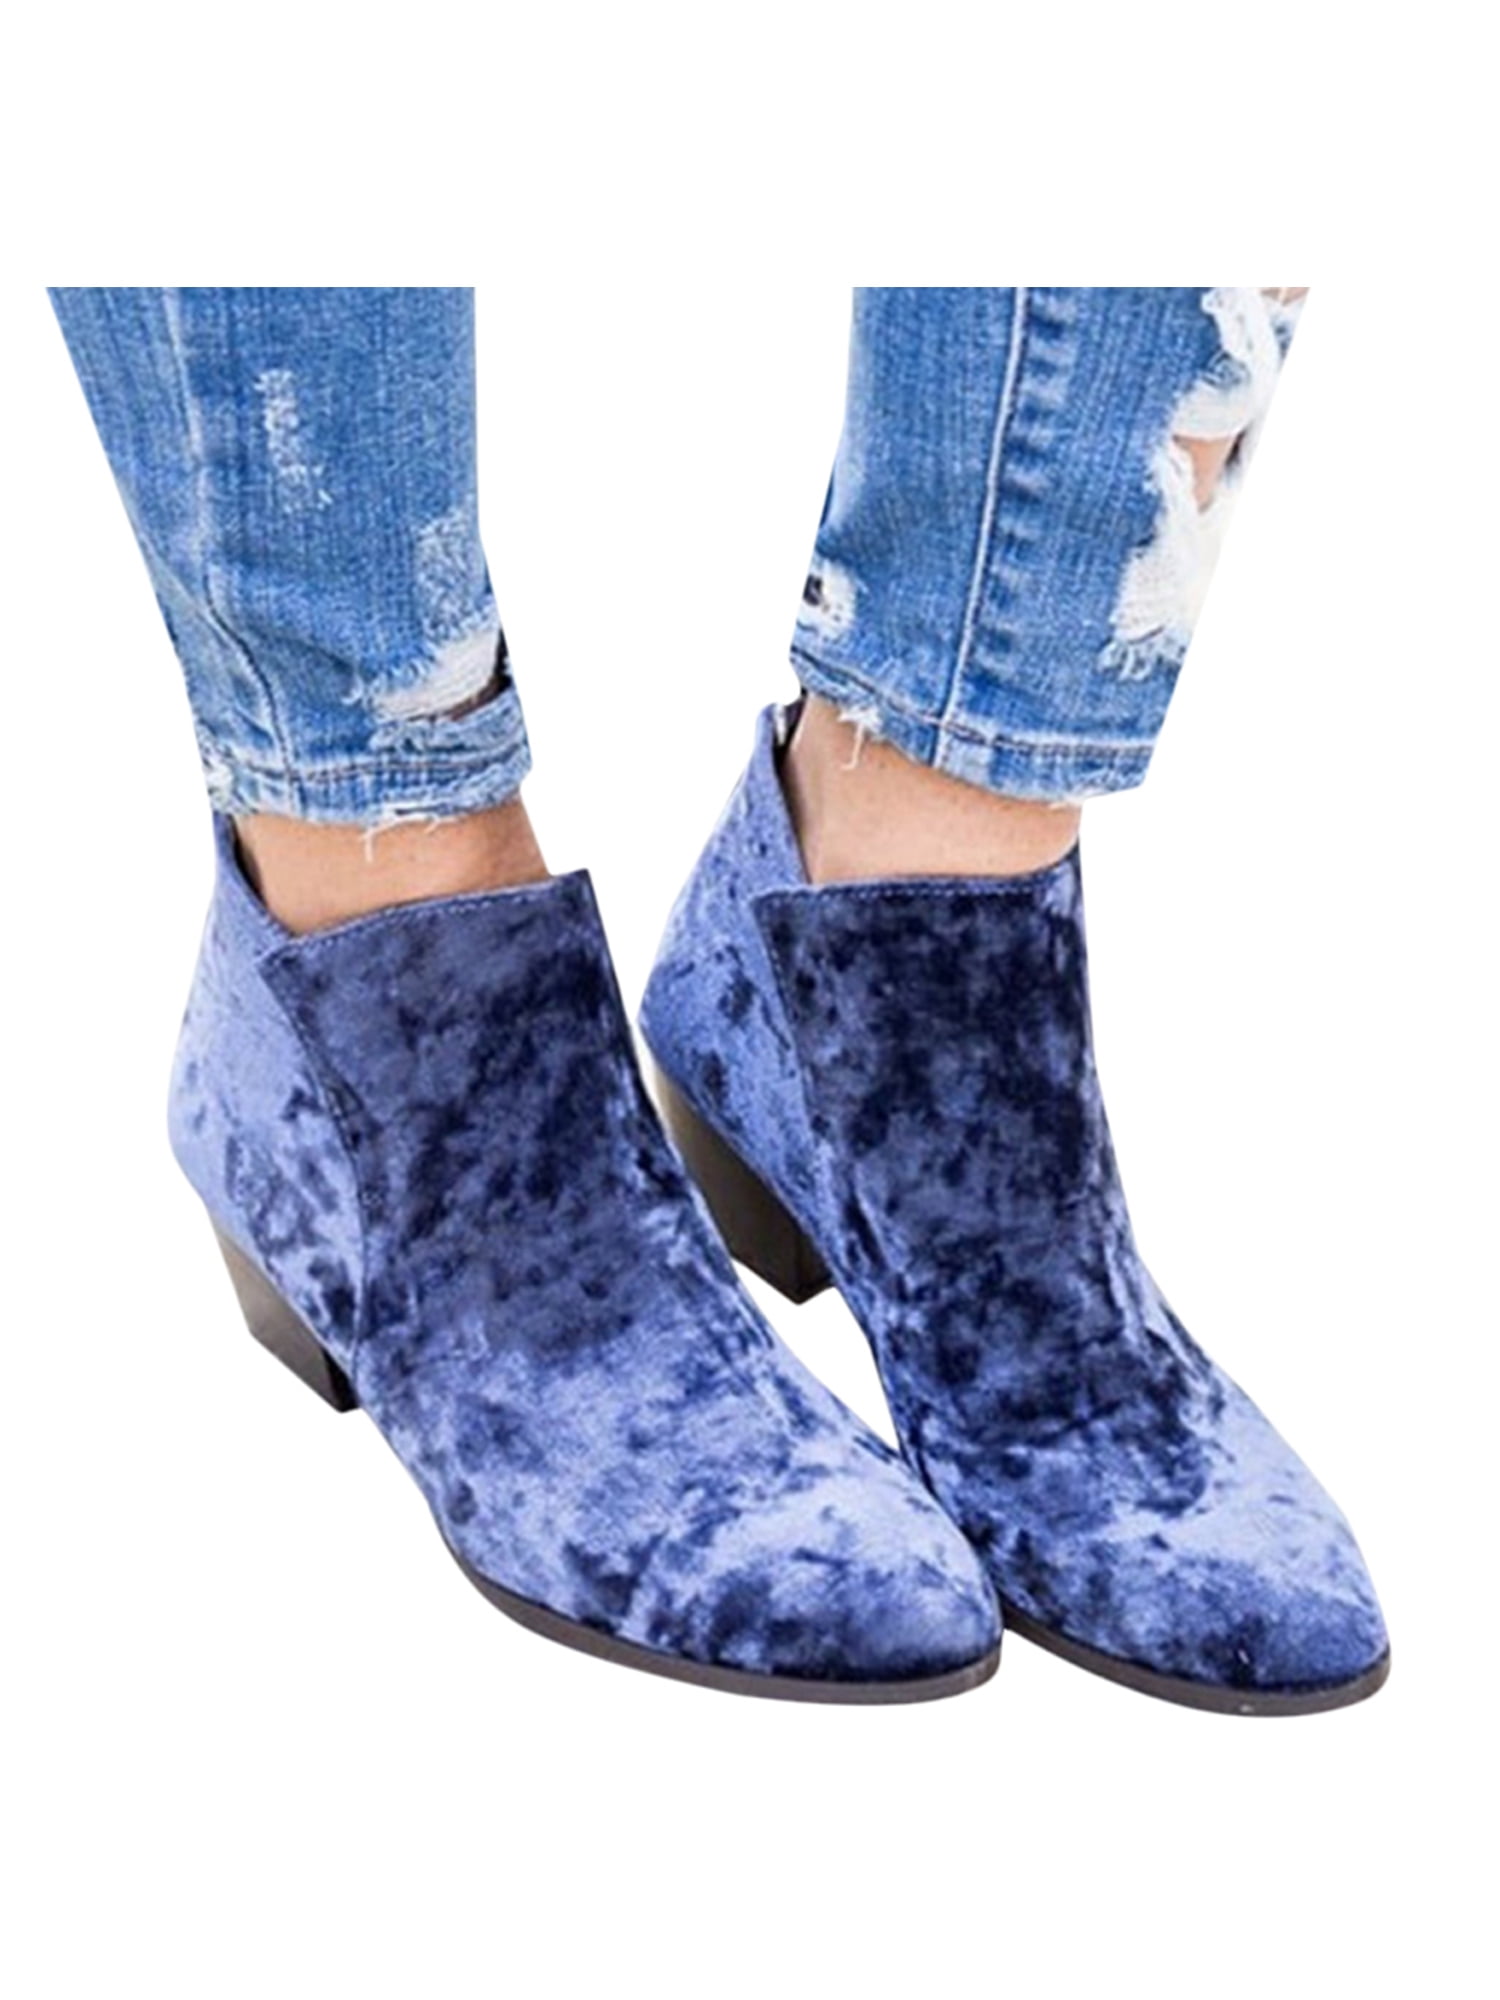 Women's Casual Booties Low Heels Block Ankle Boots Round Toe Zip Up Shoes Size 